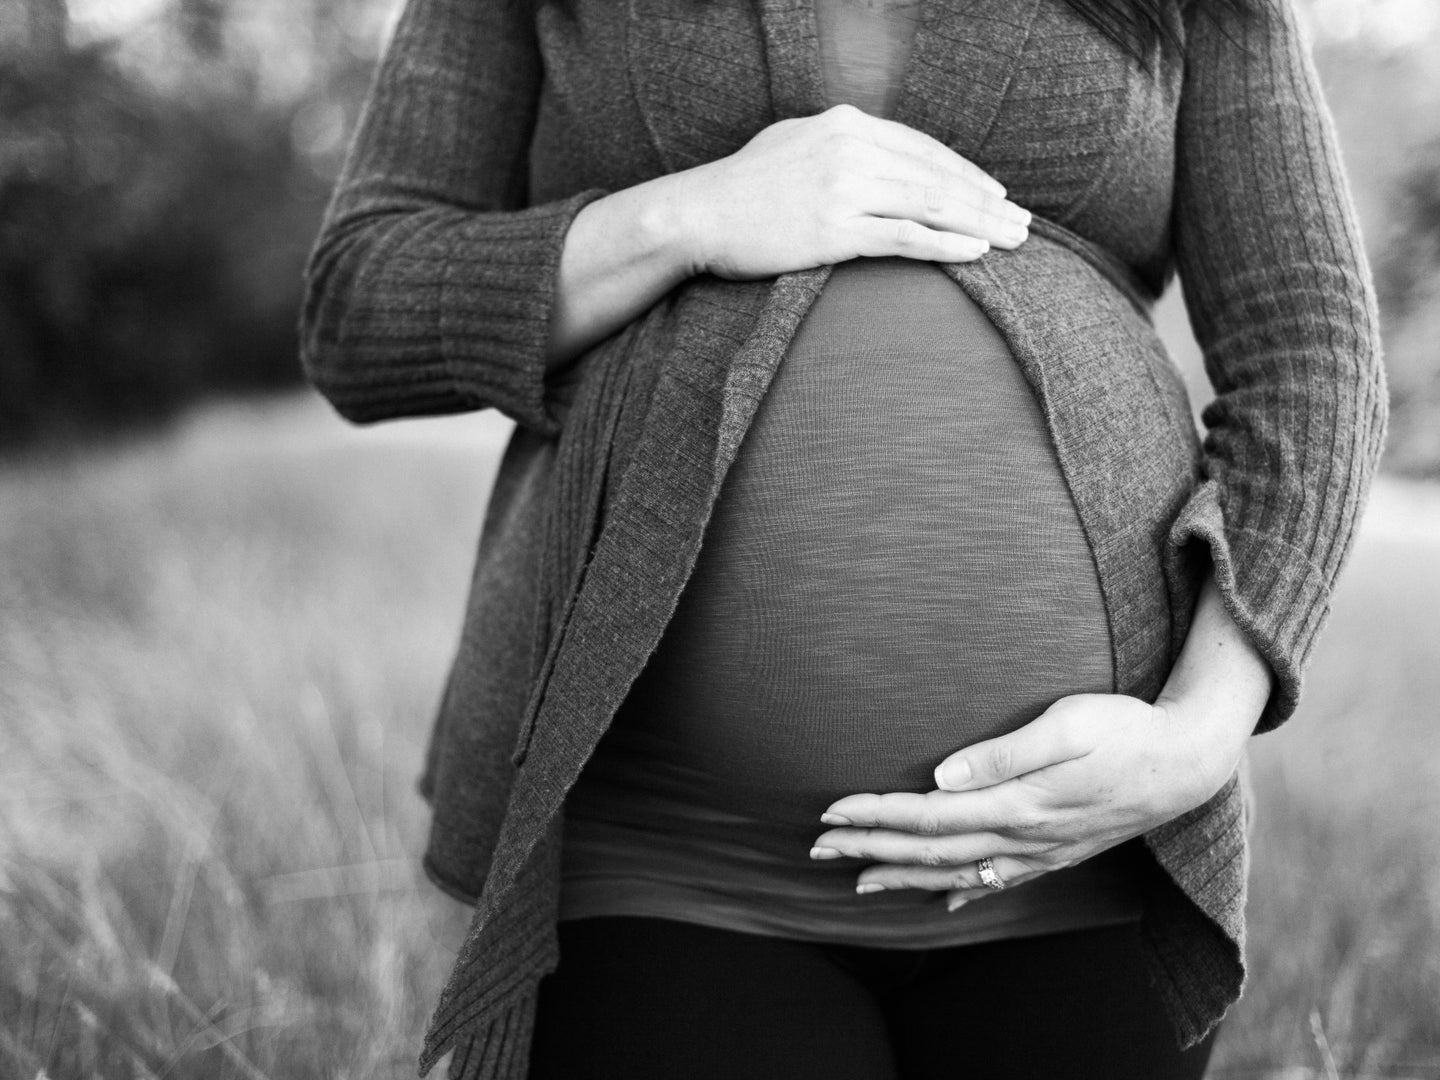 Pregnant people are especially vulnerable to the novel coronavirus, and the ongoing and ferocious spread of the highly contagious delta variant has highlighted just how crucial it is to get immunized.